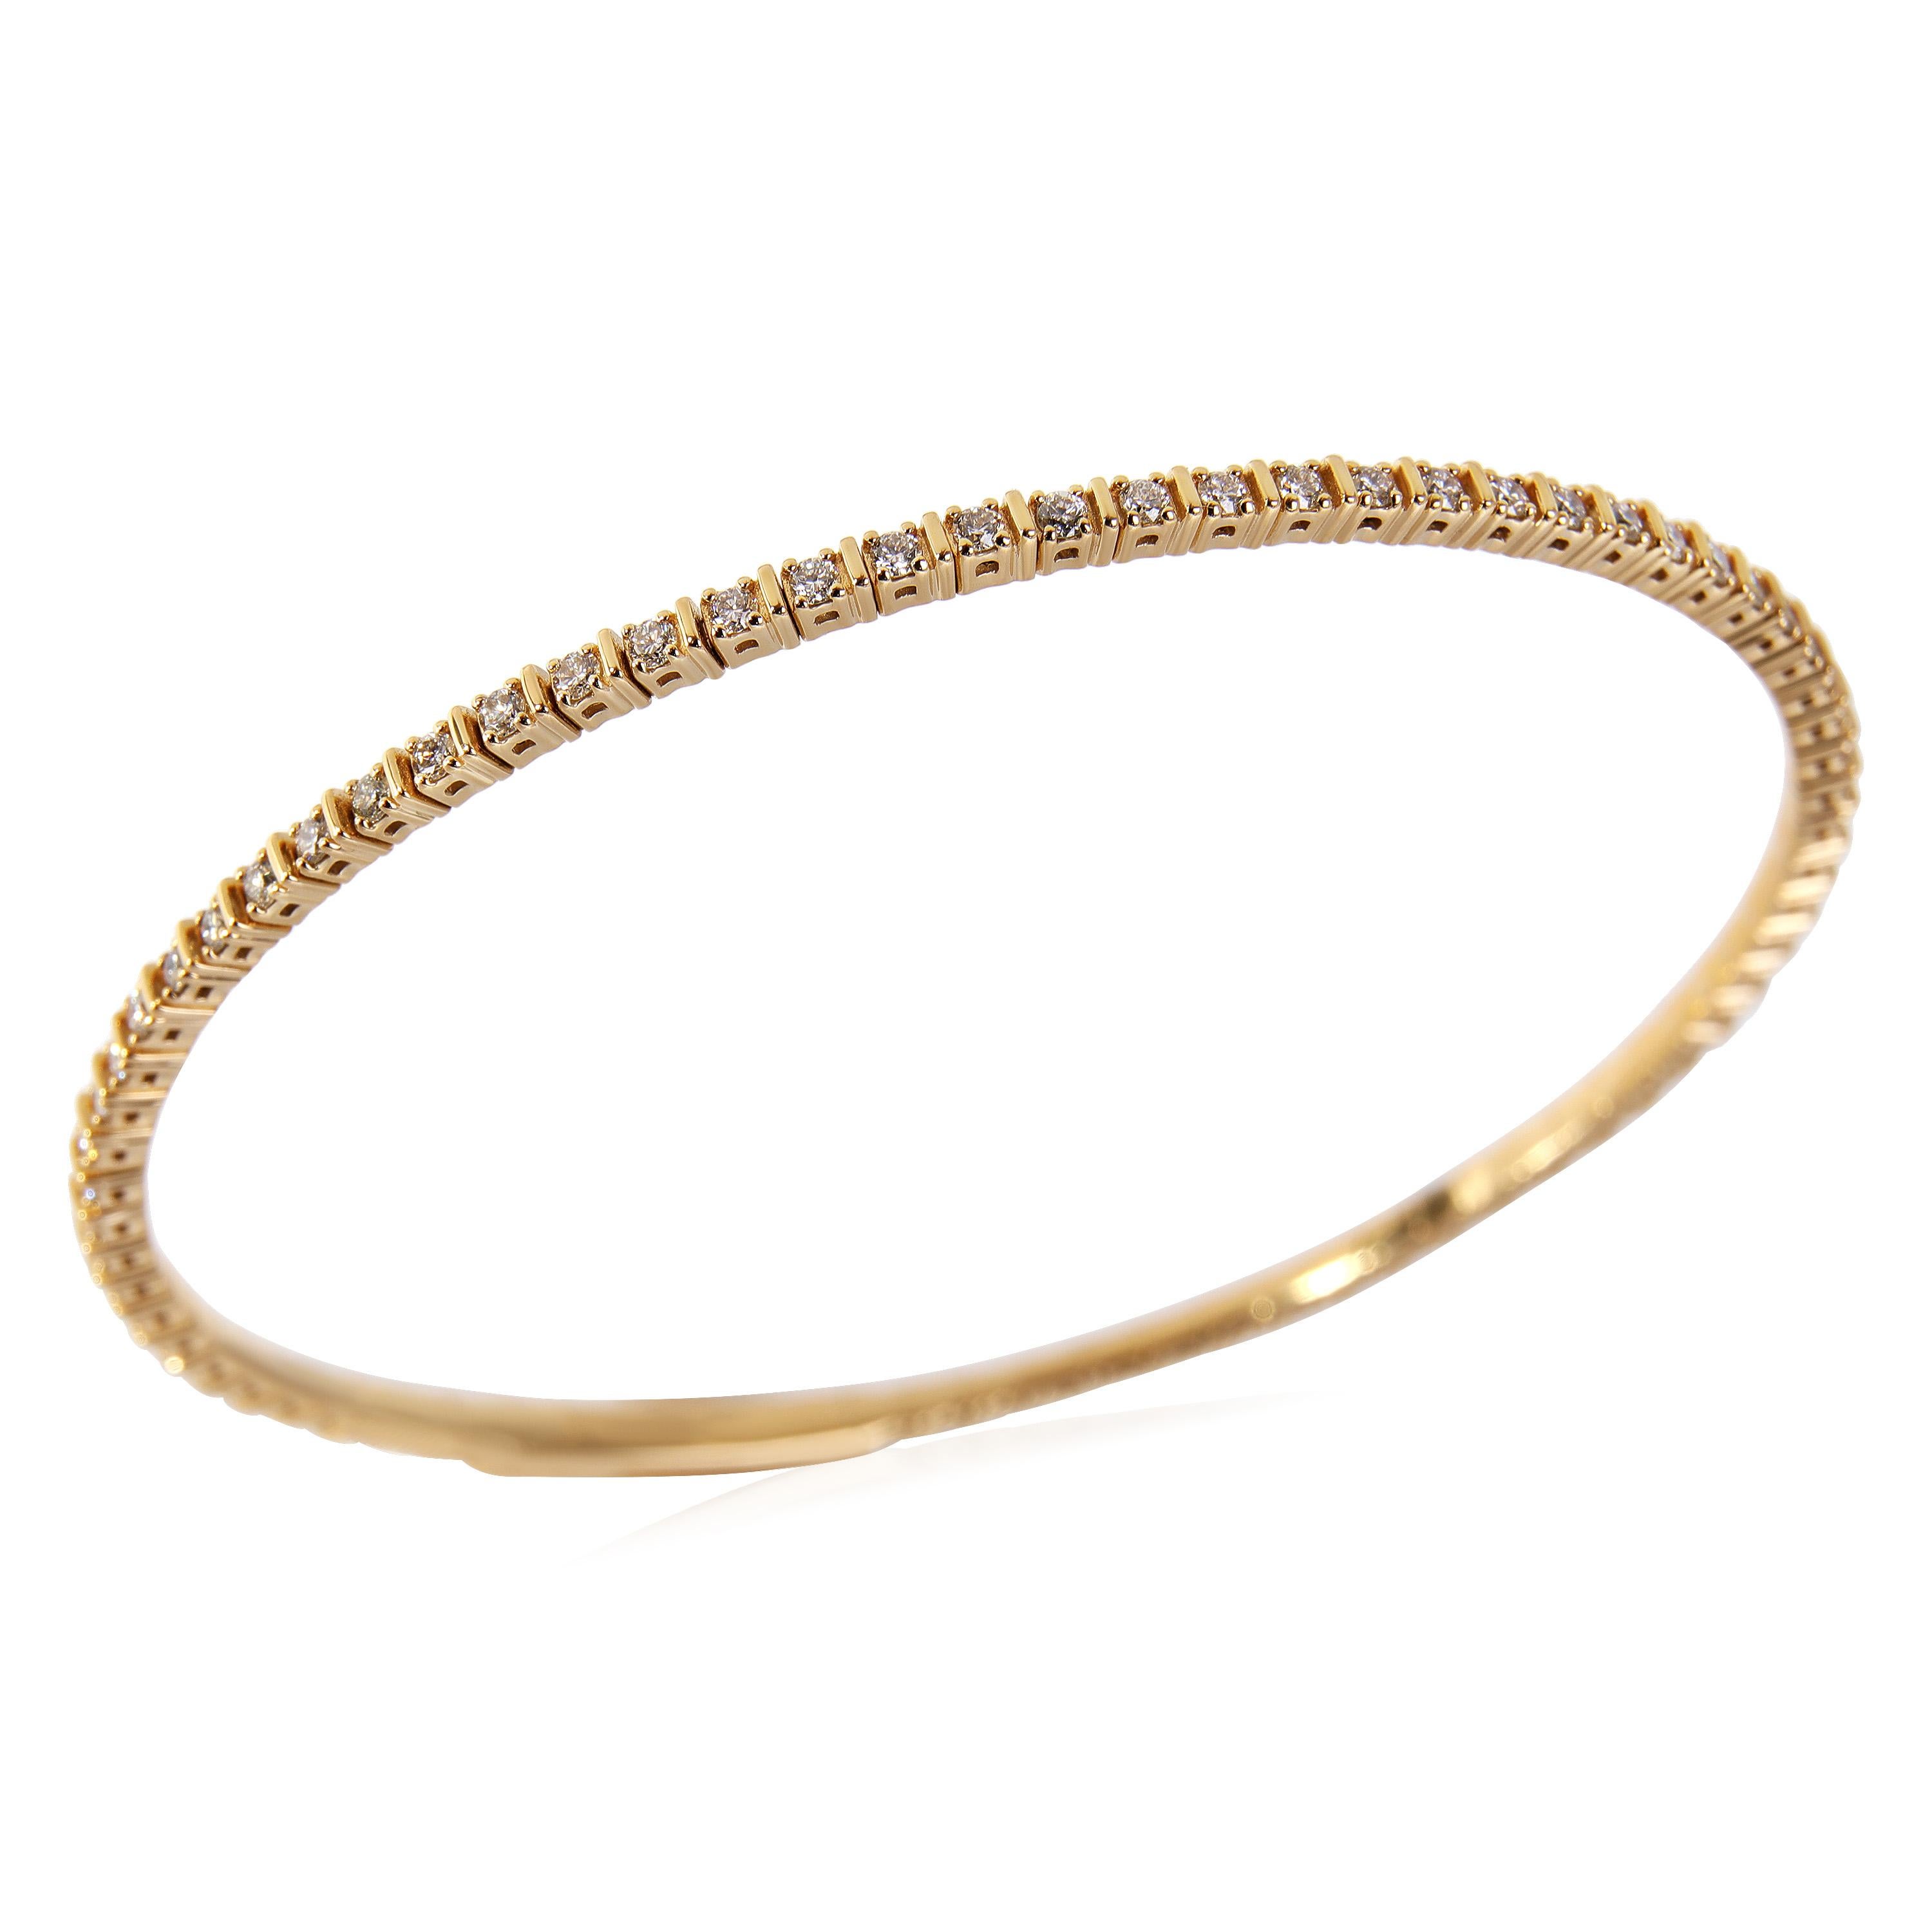 Diamond Flexible Bangle in 18k Yellow Gold (1 CTW)

PRIMARY DETAILS
SKU: 120802
Listing Title: Diamond Flexible Bangle in 18k Yellow Gold (1 CTW)
Condition Description: Retails for 2495 USD. Never Worn / Like New and in excellent condition. Bracelet